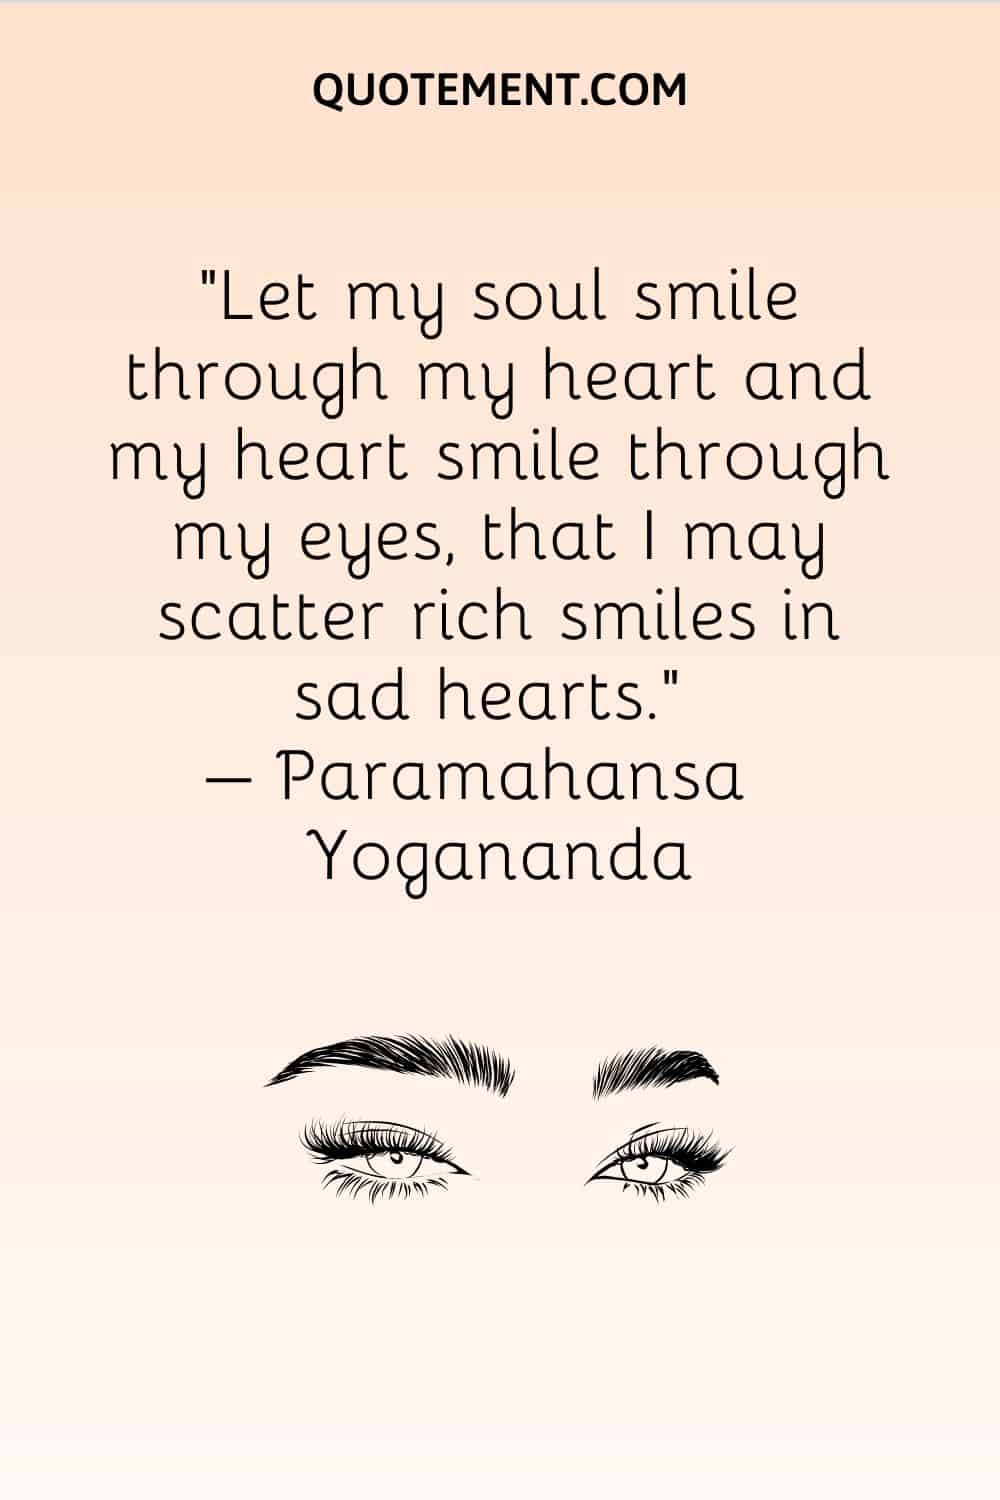 Let my soul smile through my heart and my heart smile through my eyes, that I may scatter rich smiles in sad hearts.